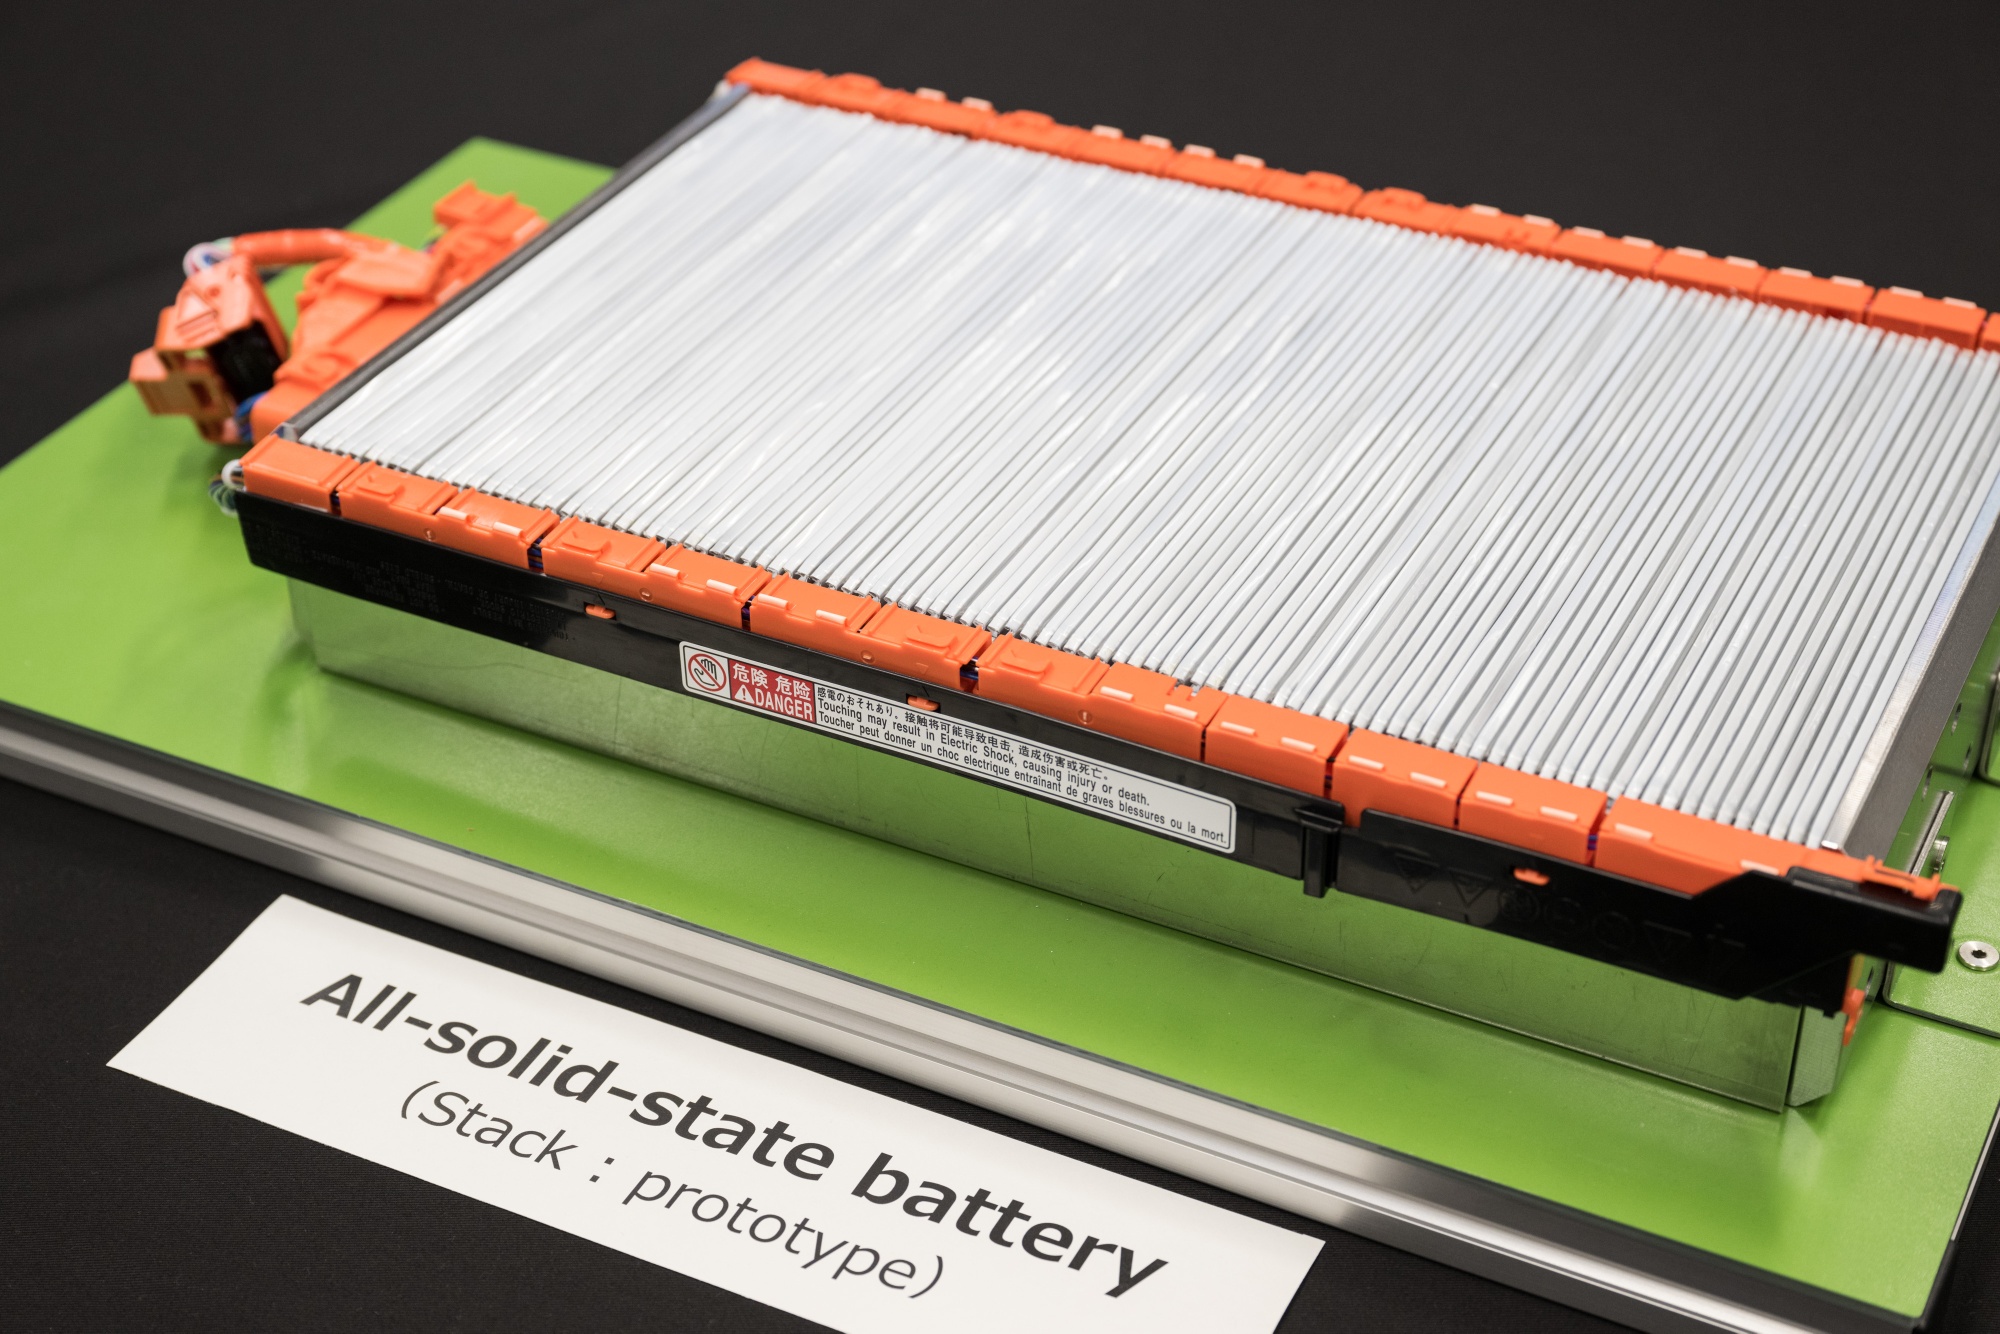 Ford Releases New Battery Capacity Plan, Raw Materials Details to